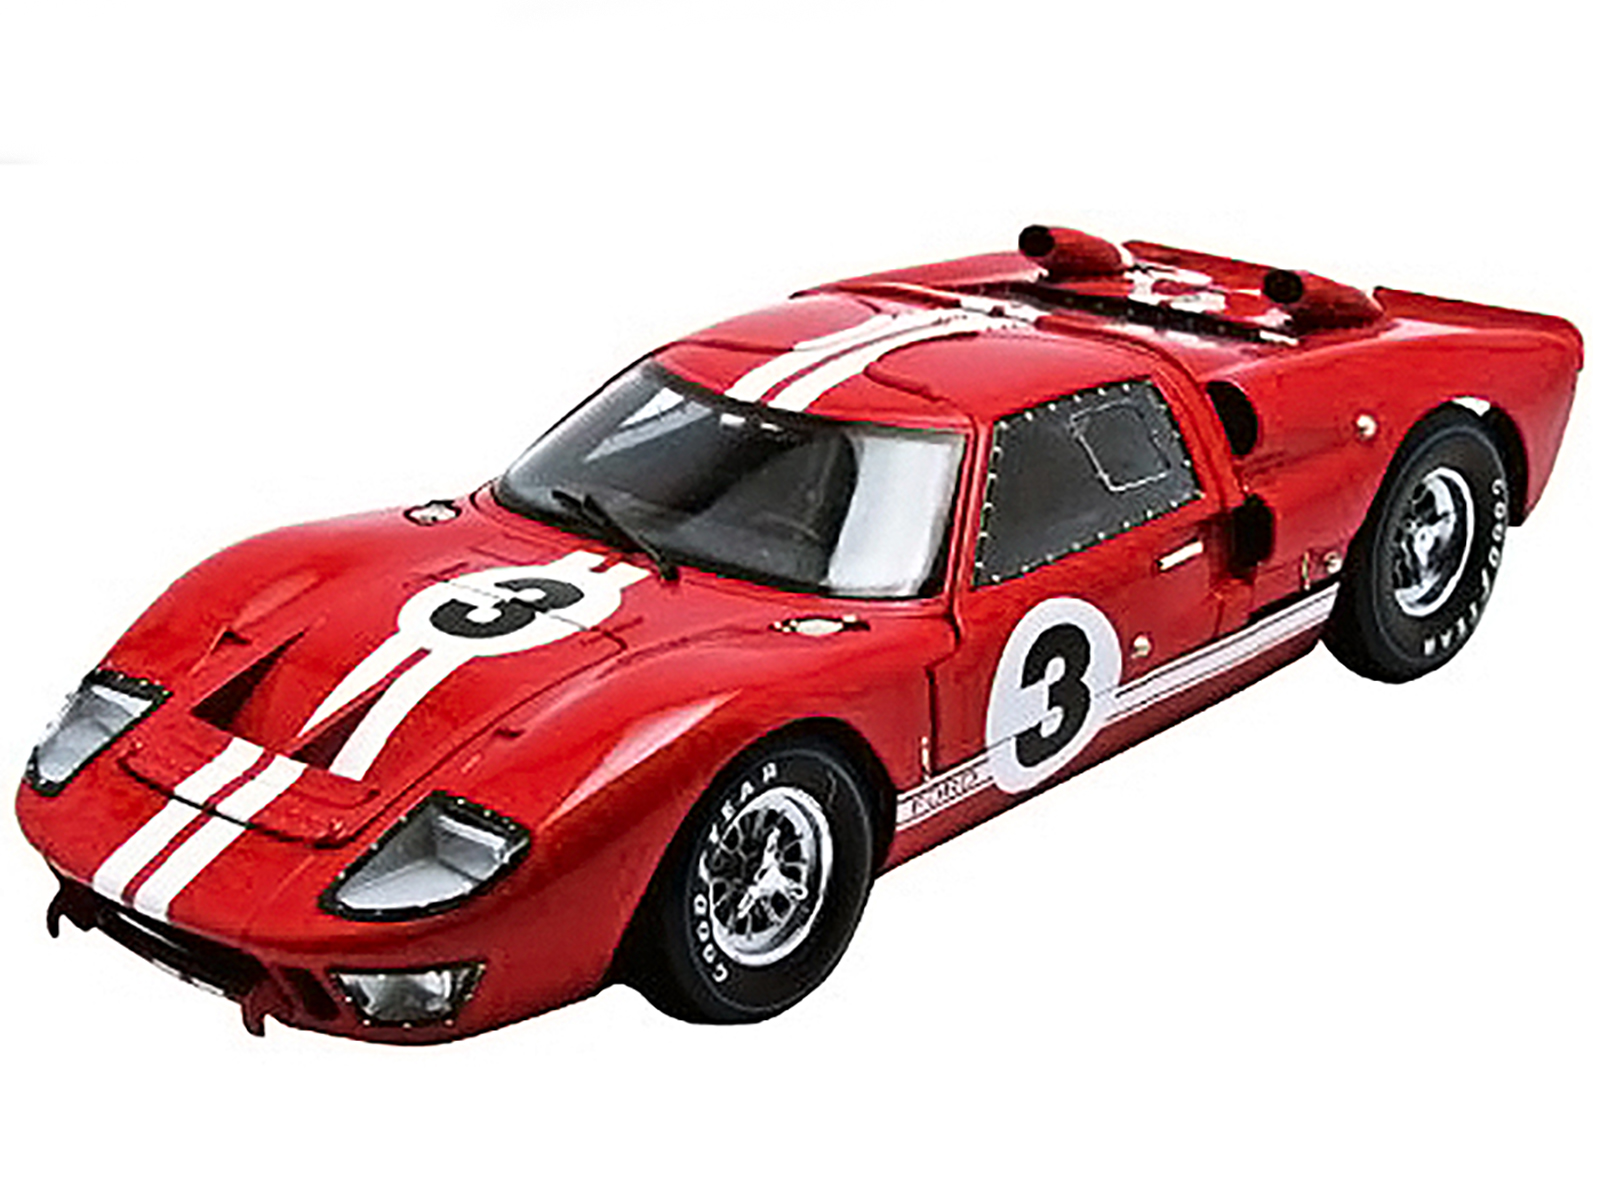 SHELBY COLLECTIBLES 1966 Ford GT-40 MK II #3 Red with White Stripes Le Mans 1/18 Diecast Model Car by Shelby Collectibles